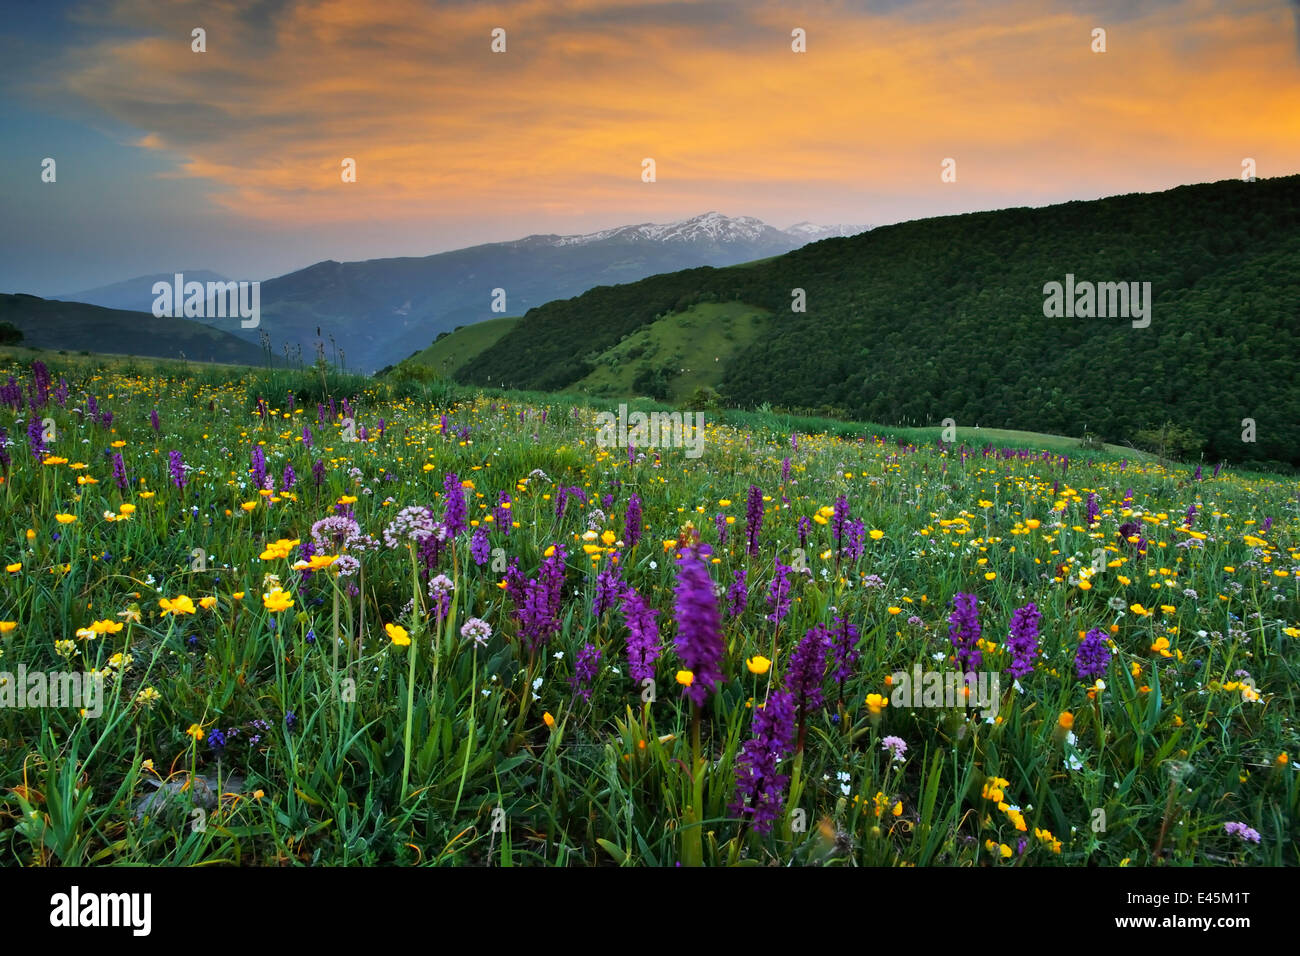 Early purple orchids (Orchis mascula) in flower meadow, Forca Canapine, Monti Sibillini National Park, Umbria, Italy, May 2009 Stock Photo